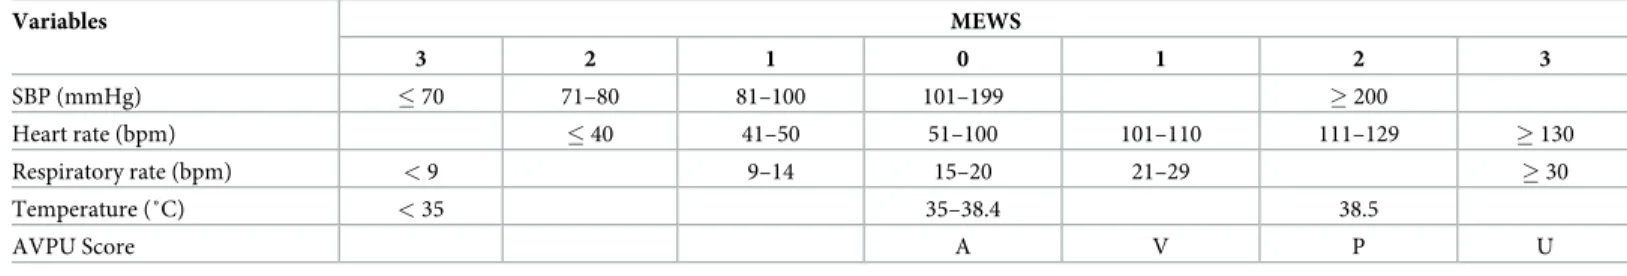 Table 1. Modified early warning score (MEWS).